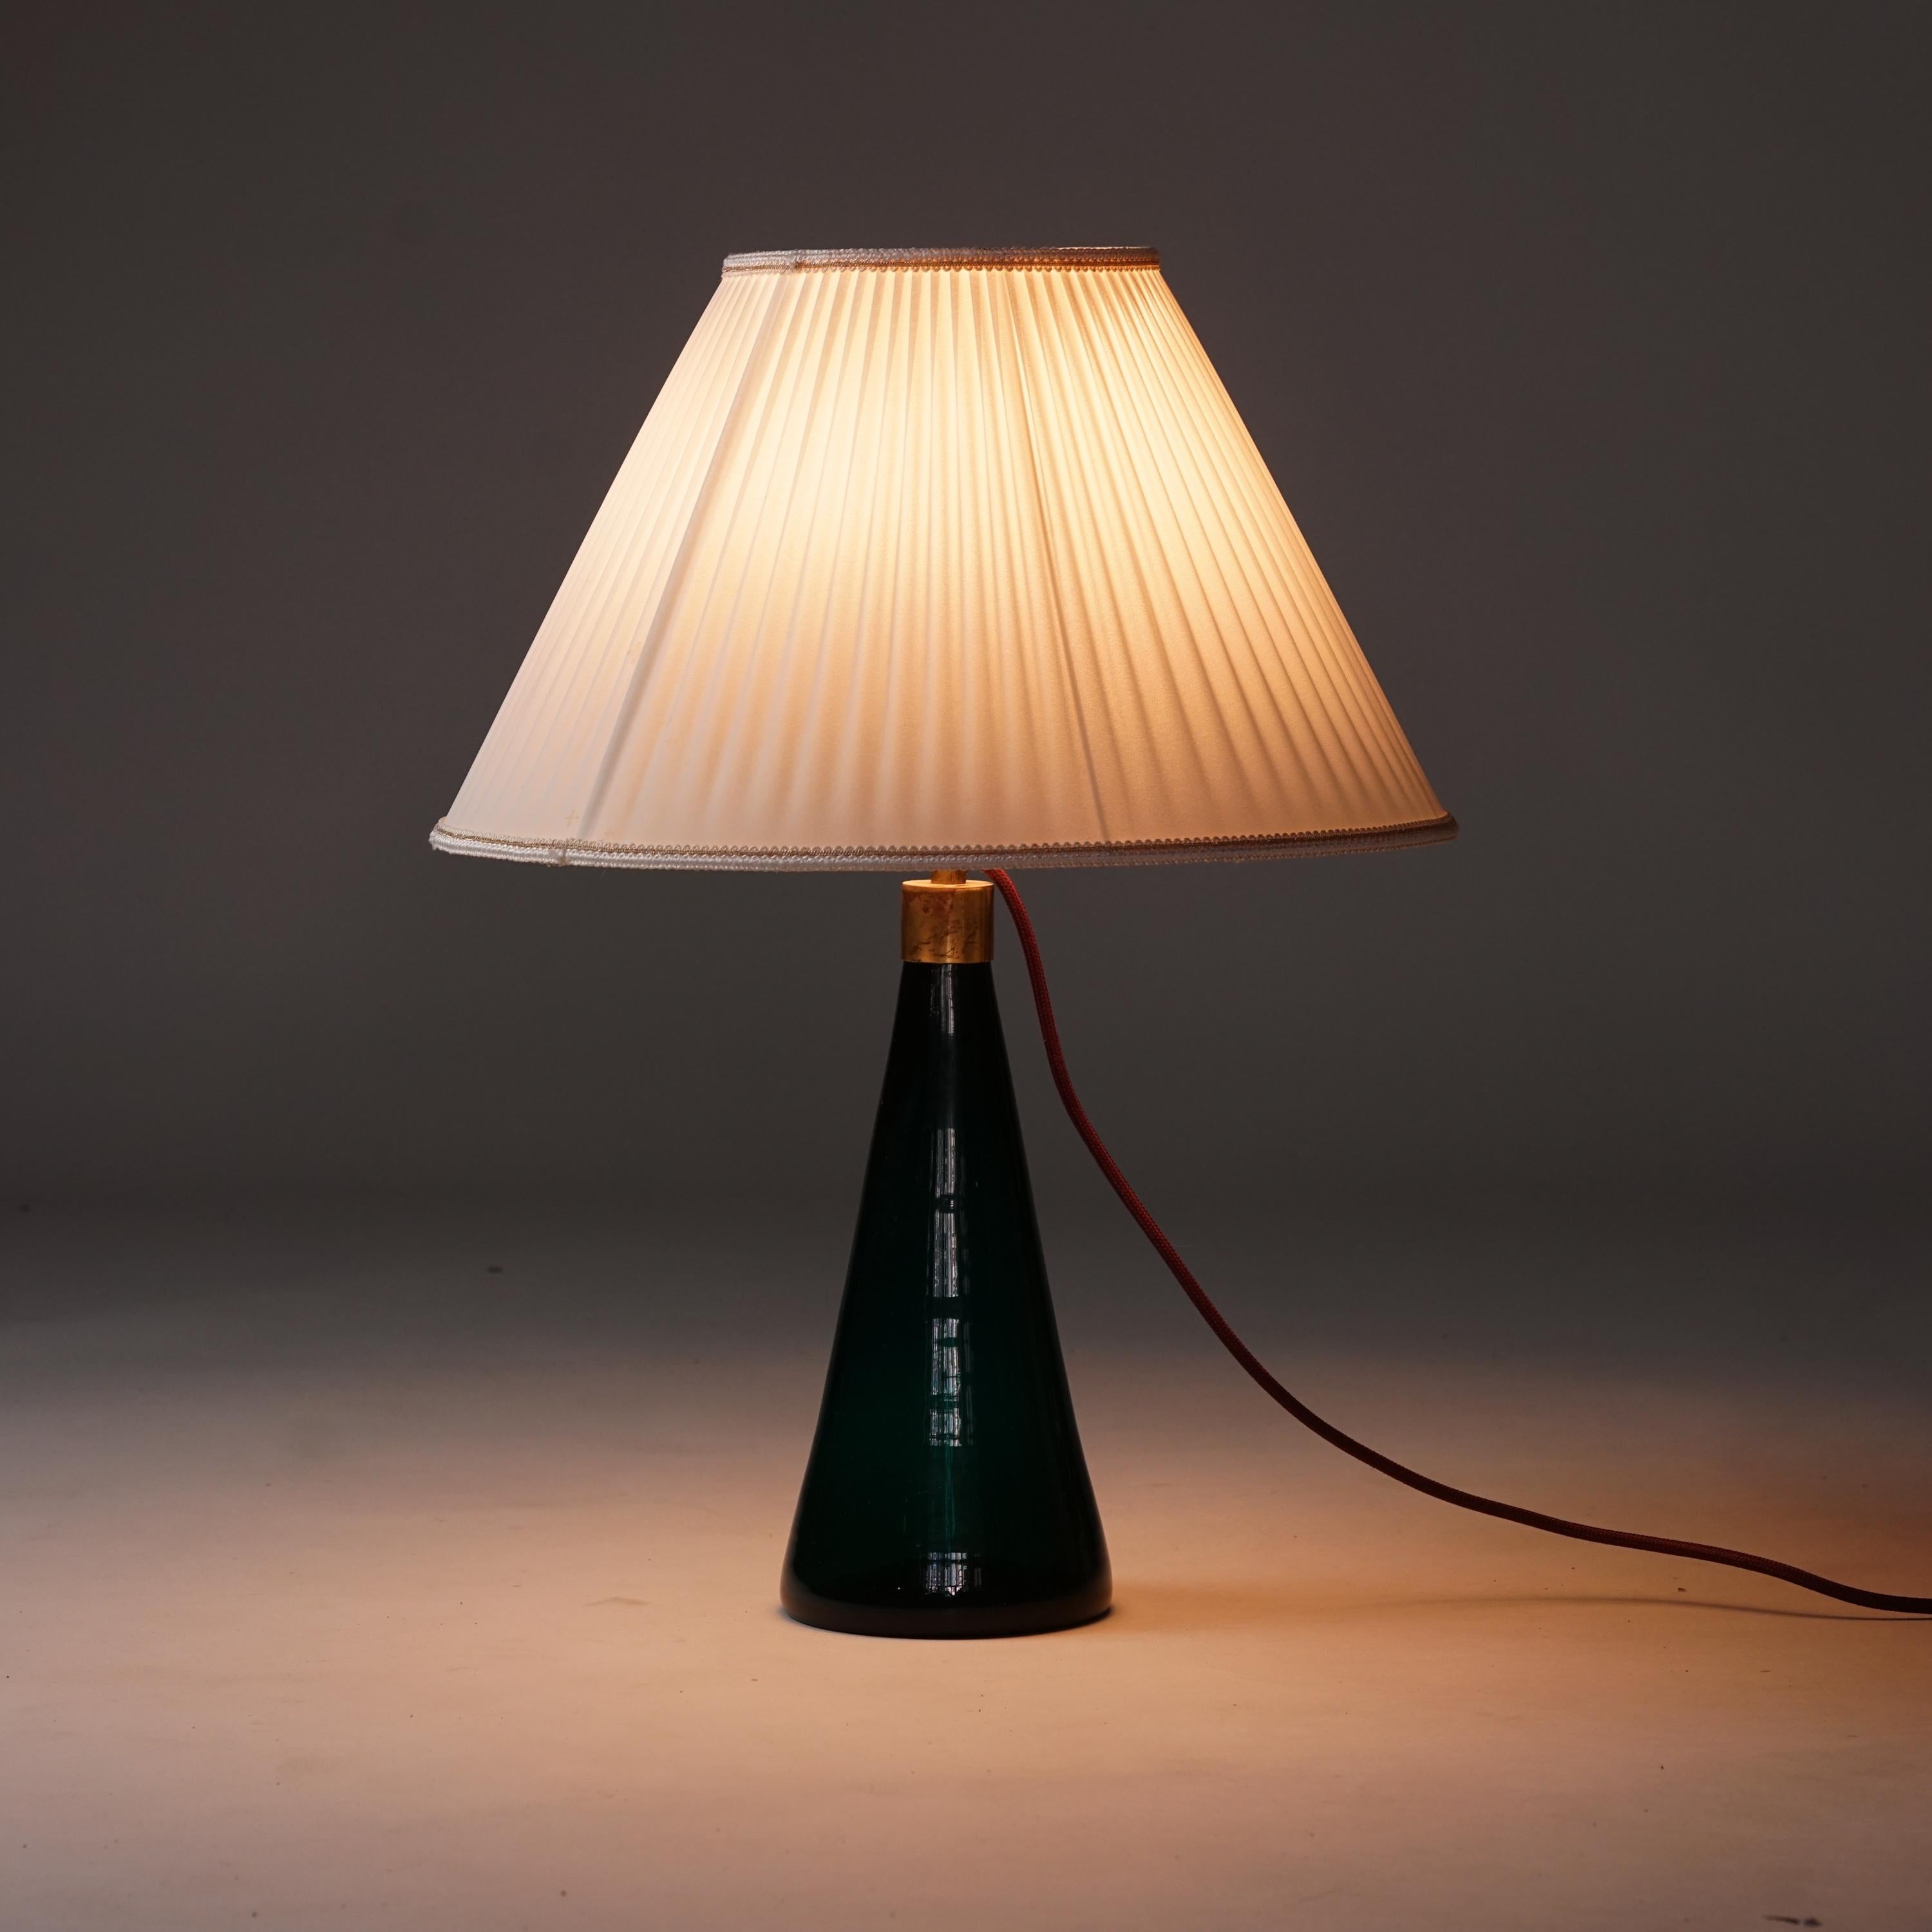 Glass Table Lamp, Gunnel Nyman, Idman Oy, 1940/1950s For Sale 3